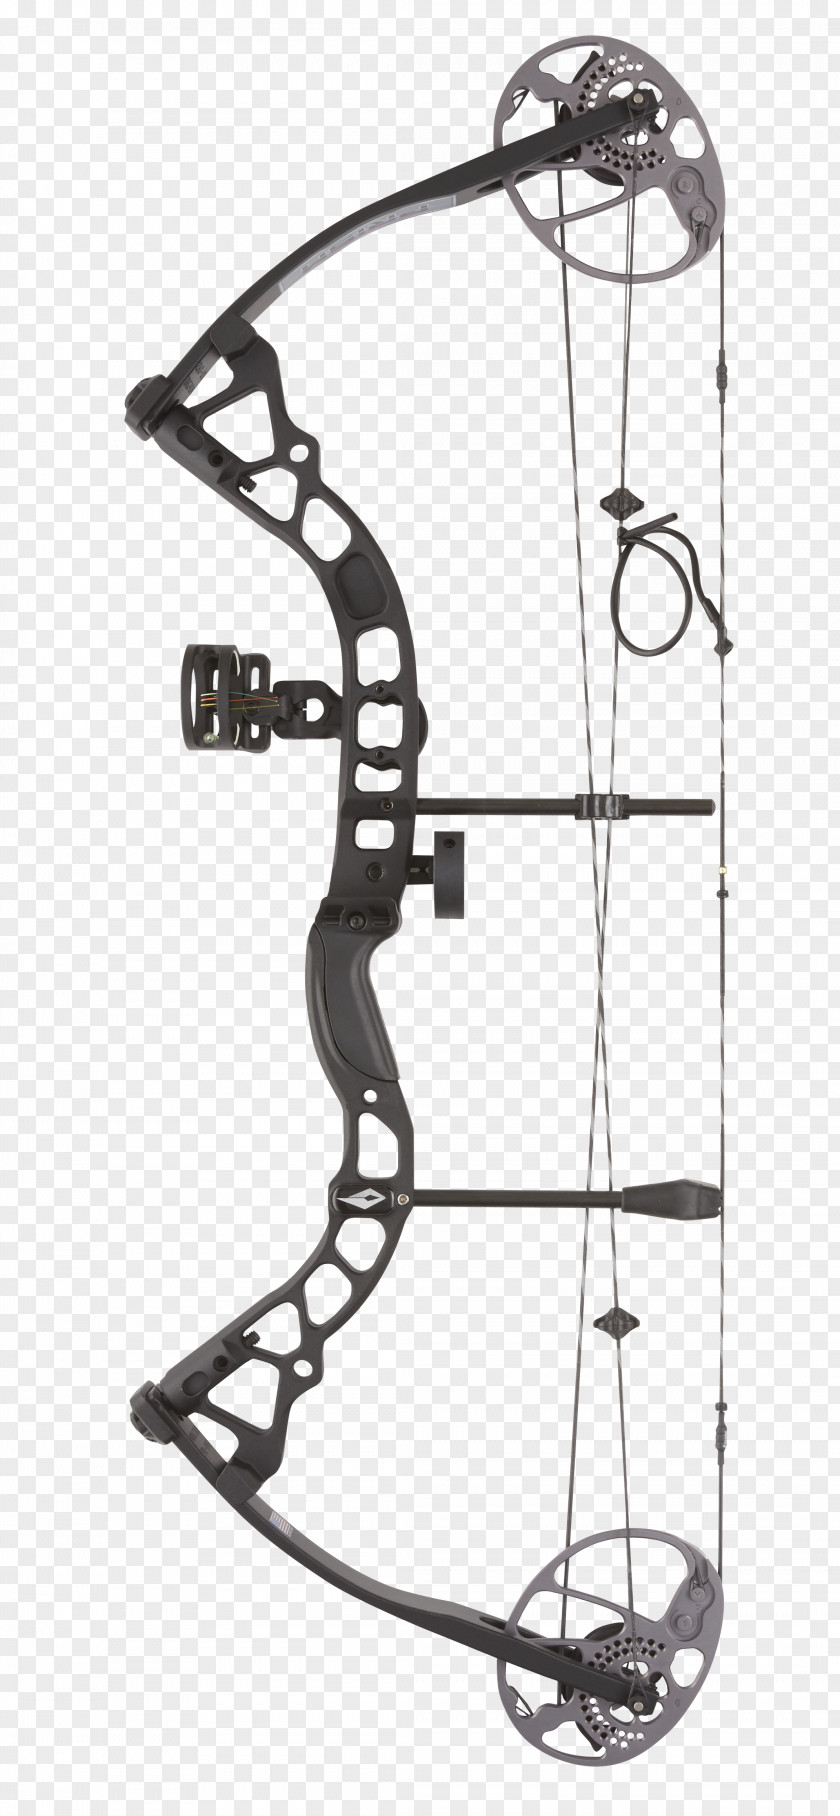 Archery Compound Bows Bow And Arrow Diamond Recurve PNG